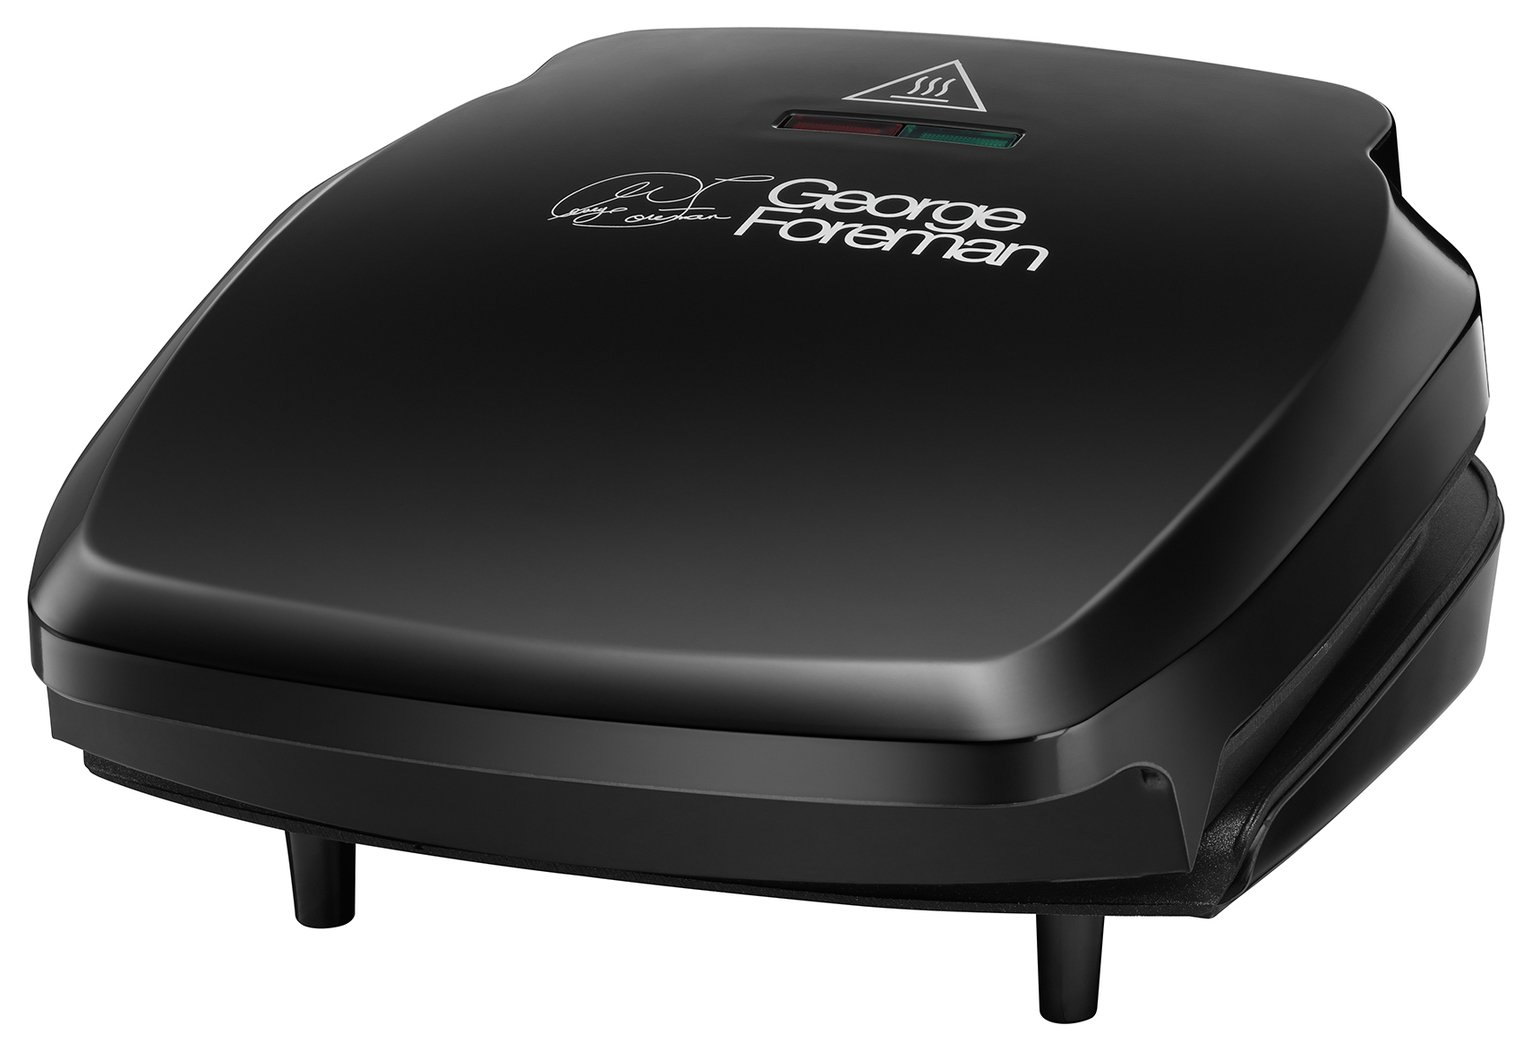 George Foreman 23400 2 Portion Compact Grill